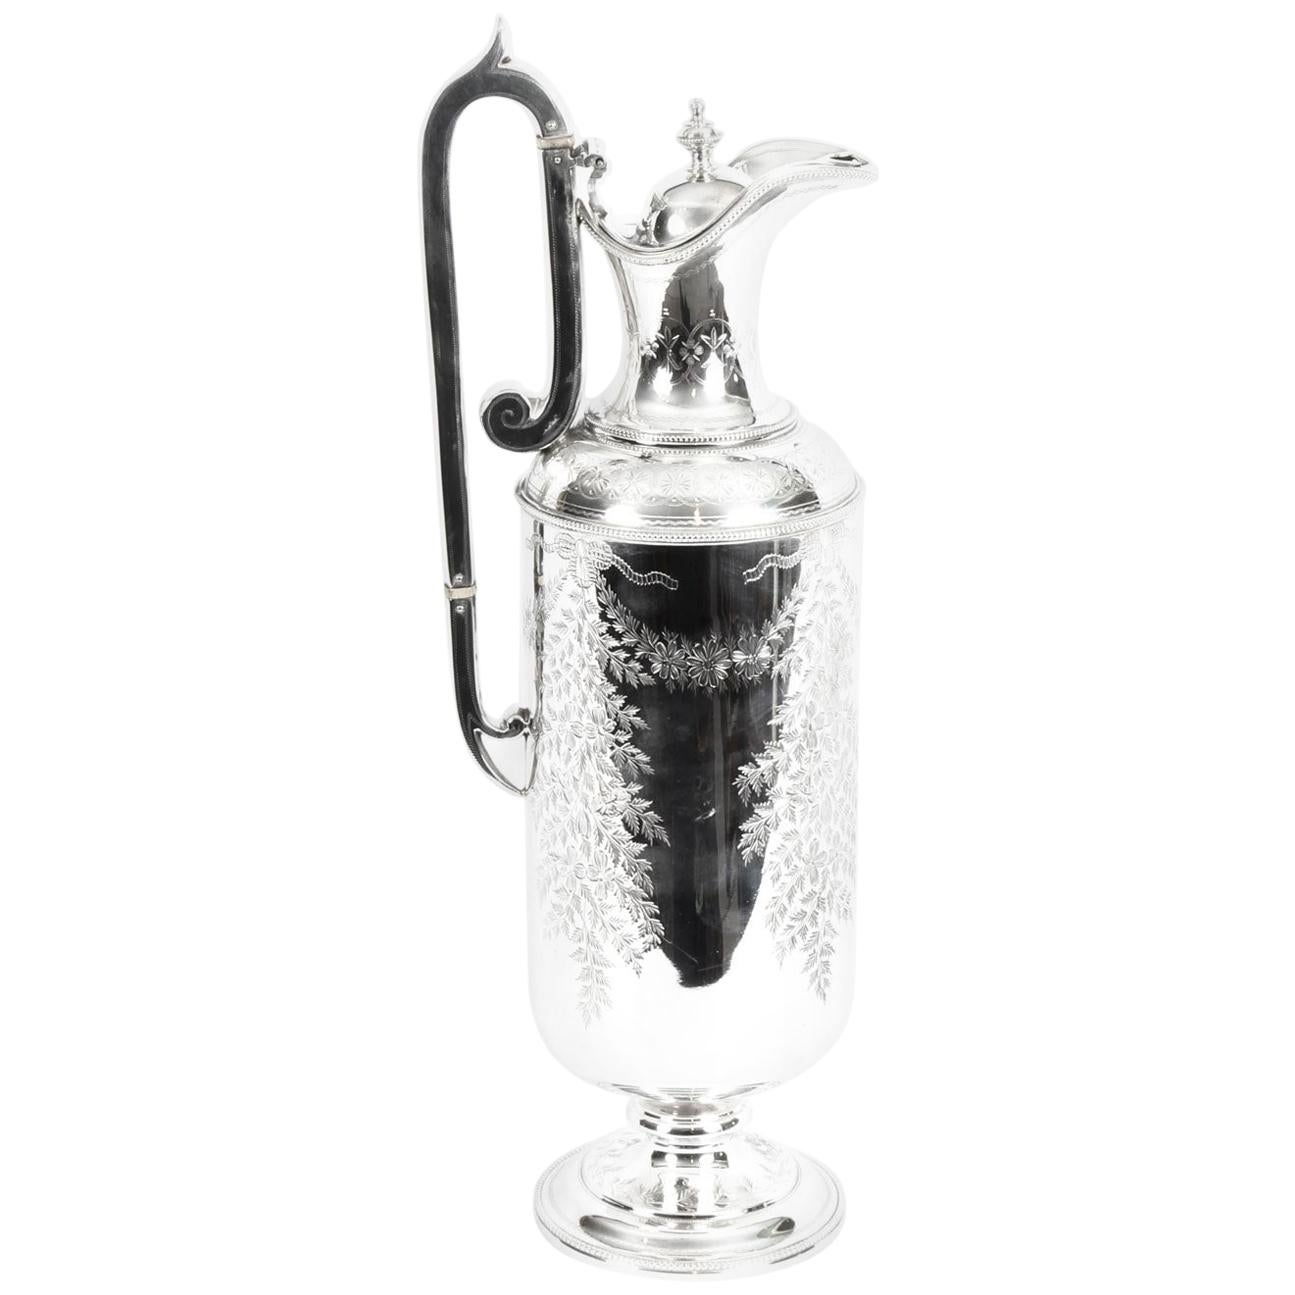 Antique Victorian Silver Plate Claret Jug by Martin Hall & Co., 19th Century